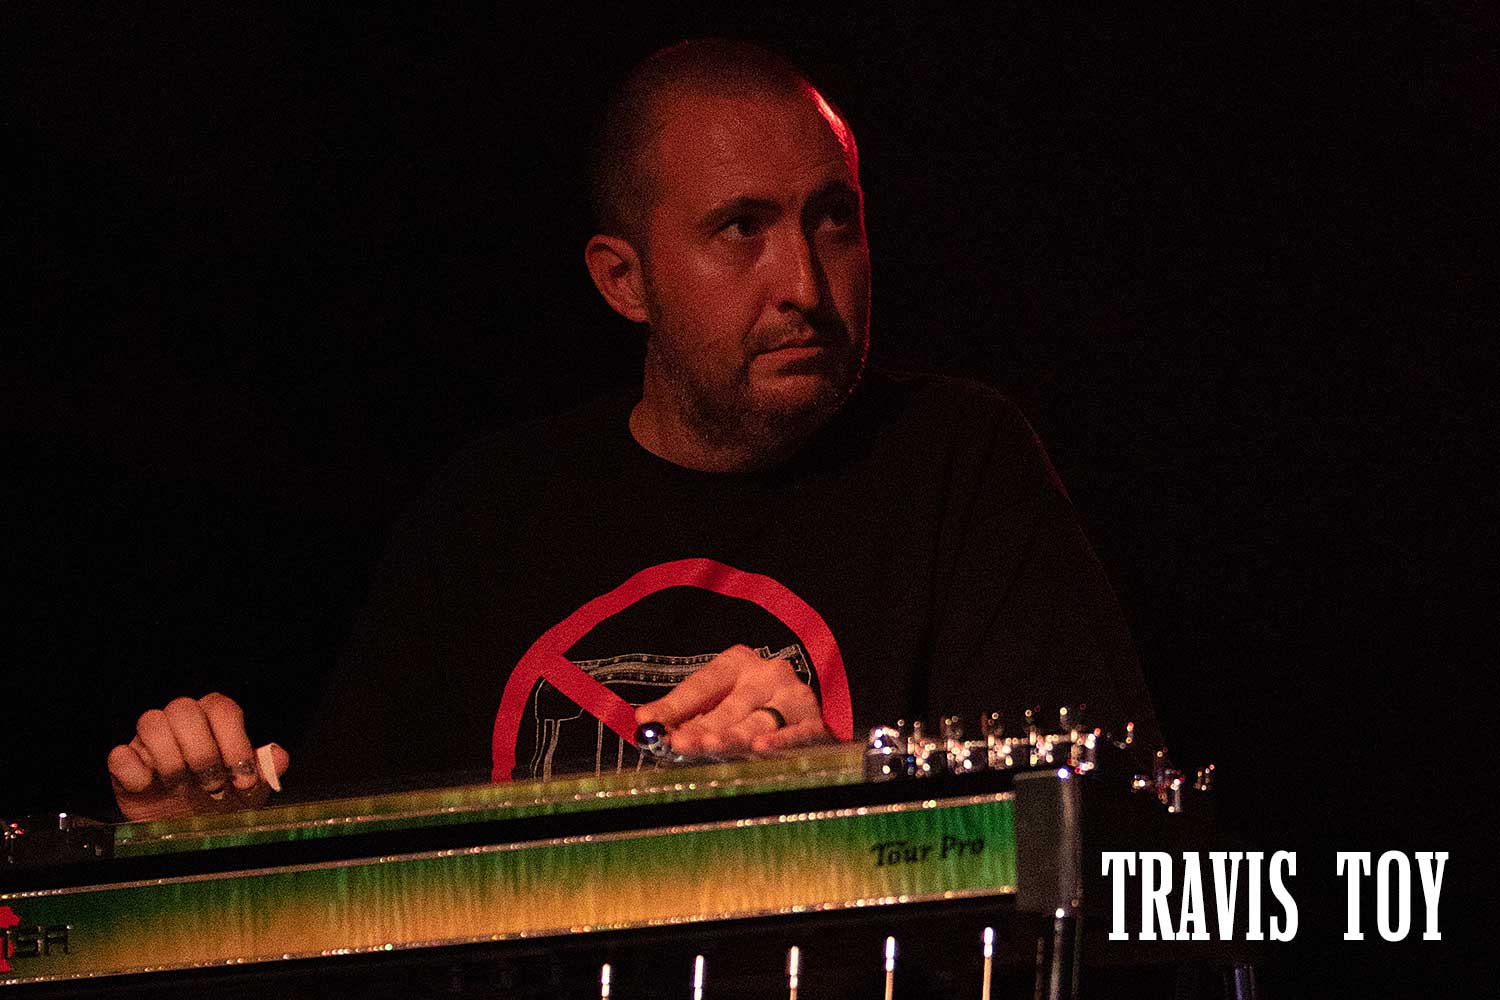 Travis Toy on pedal steel guitar